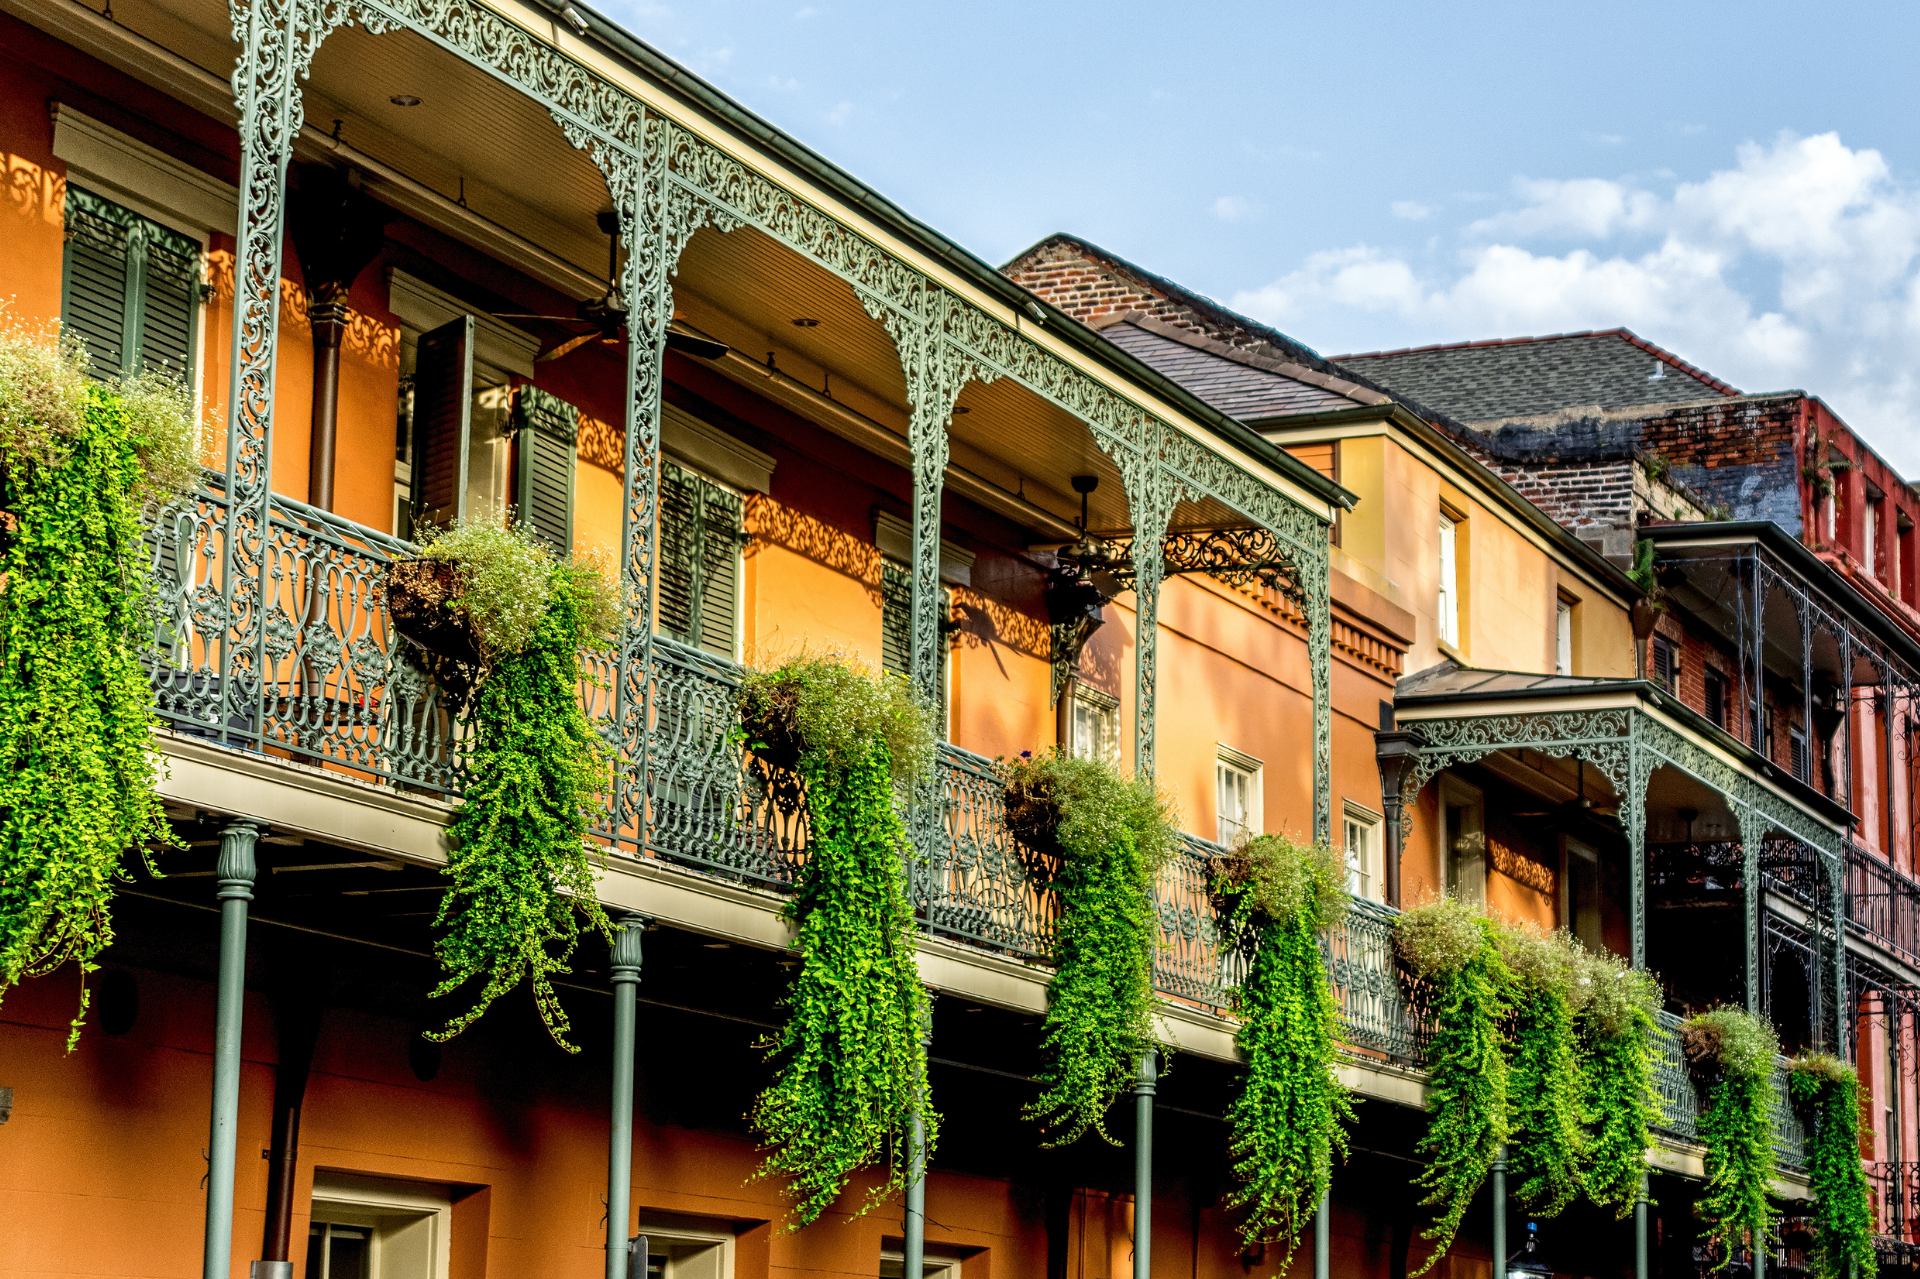 French Quarter Balconies with Hanging Plants